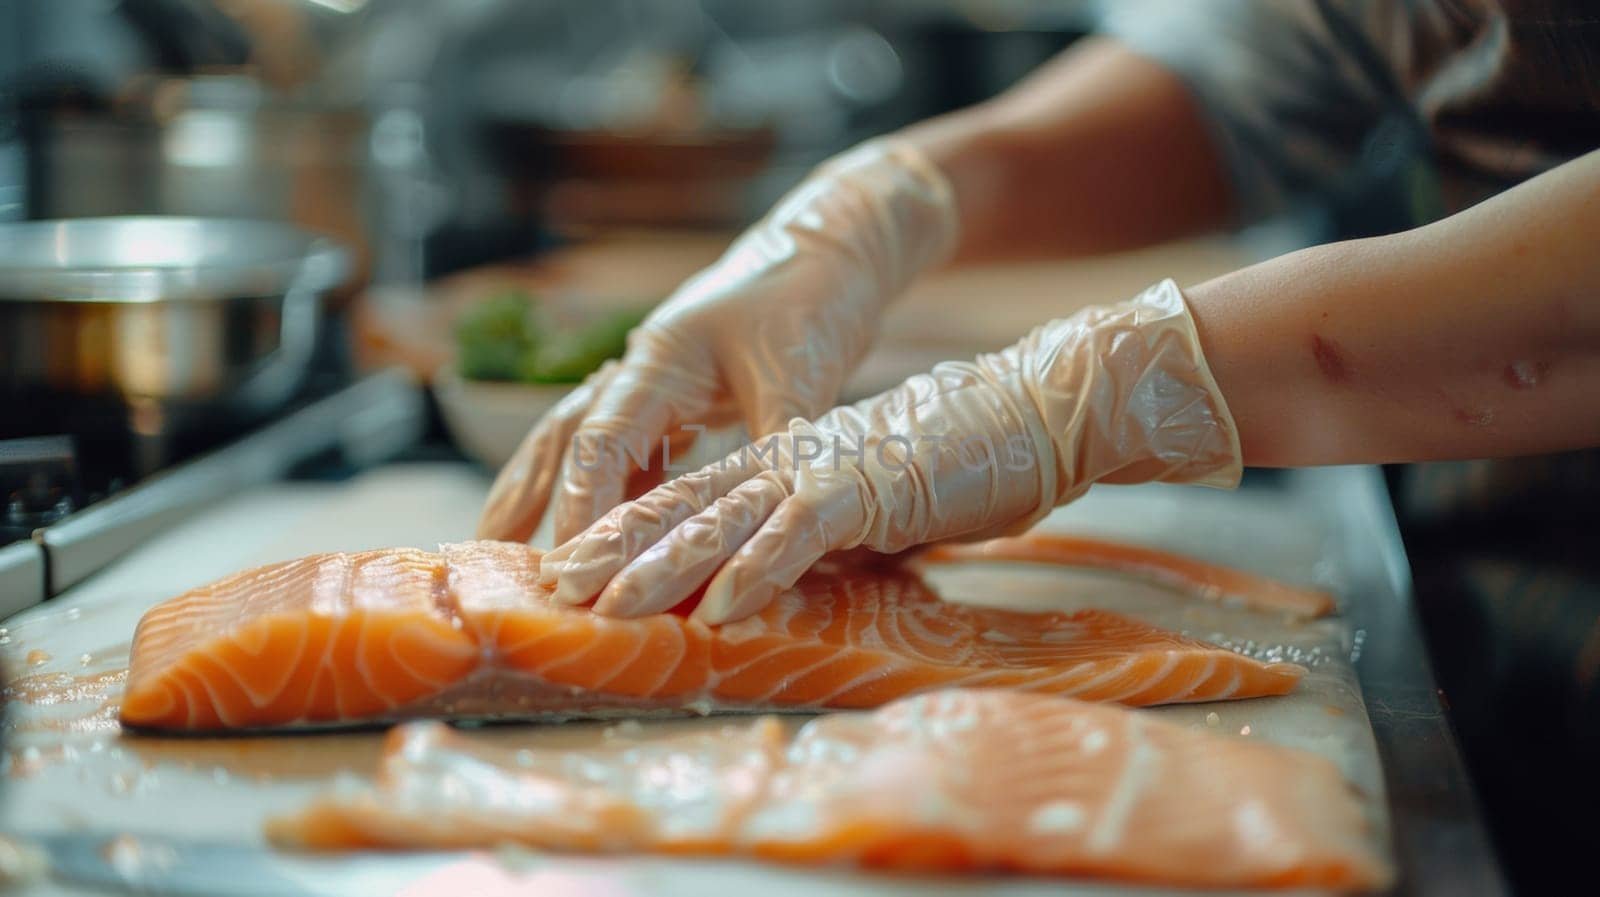 A person in gloves cutting up a piece of salmon on top of the counter